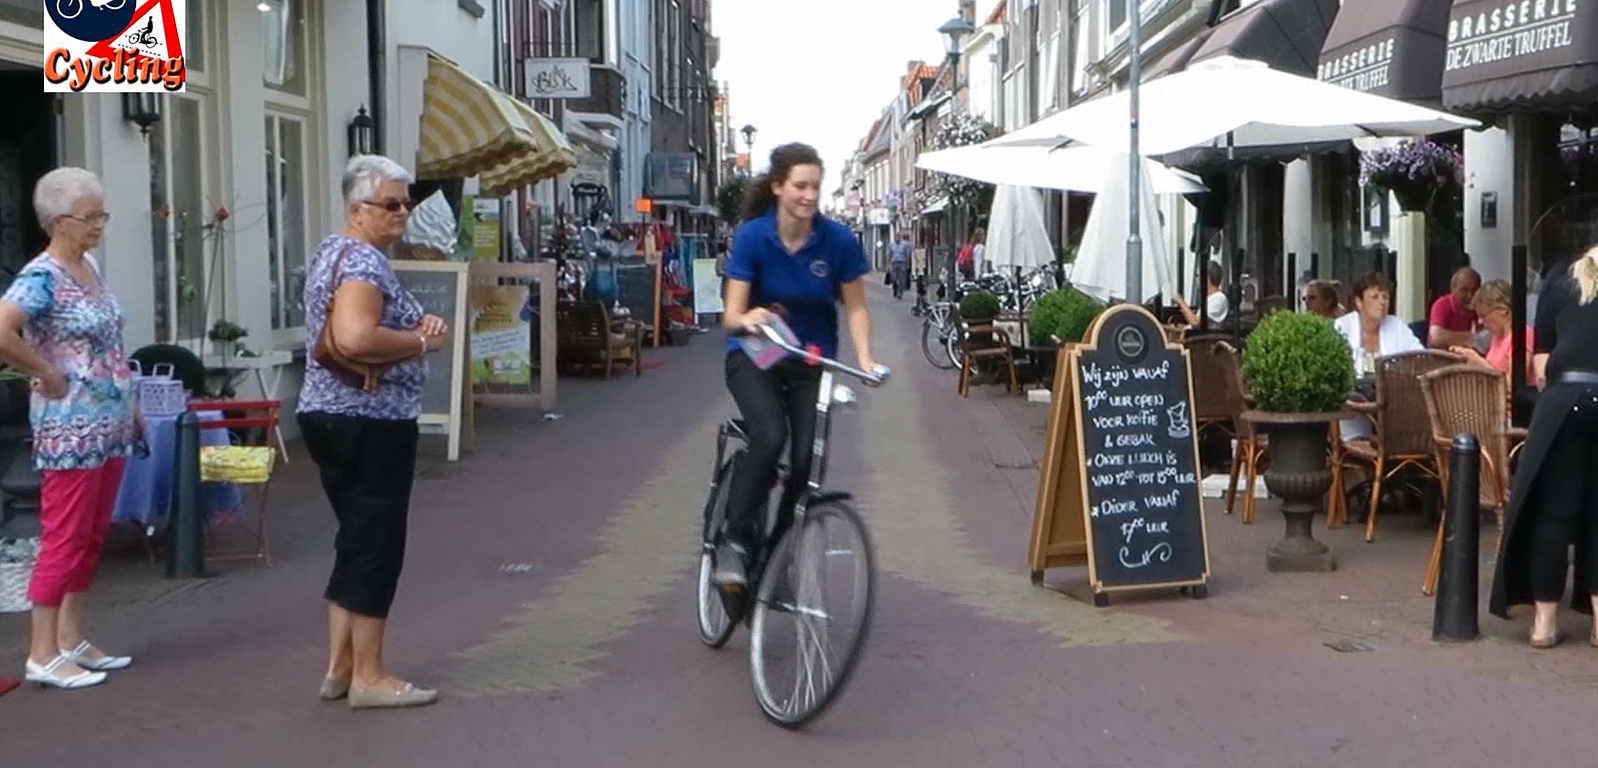 Crowded cycleways lead to new urban design approach – BICYCLE DUTCH